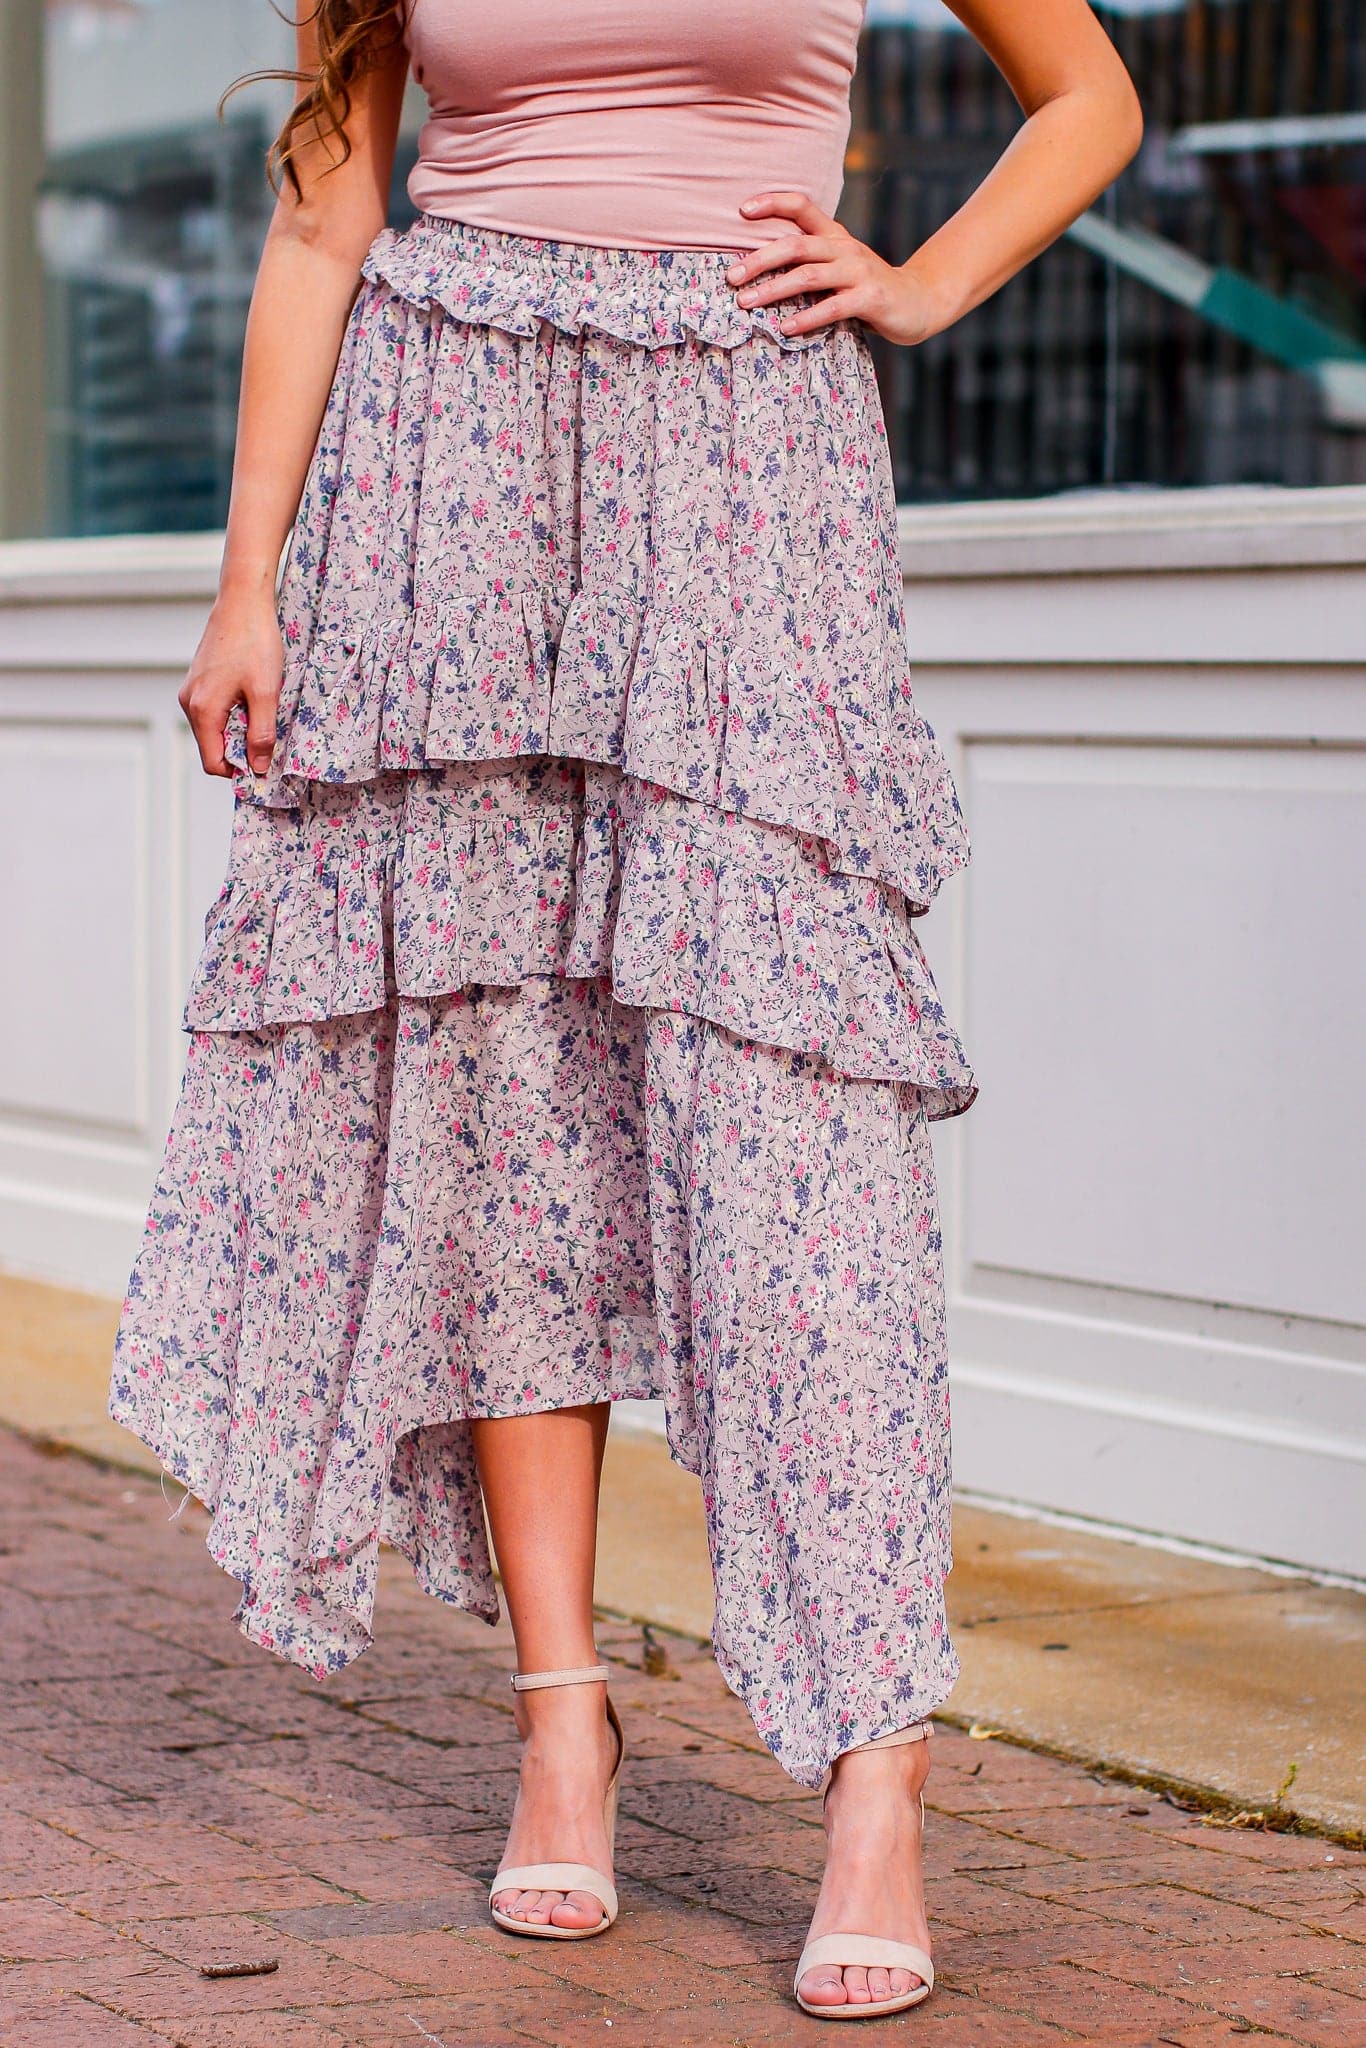 S / Dusty Lavender Melody Garden Floral Maxi Skirt - FINAL SALE - Madison and Mallory